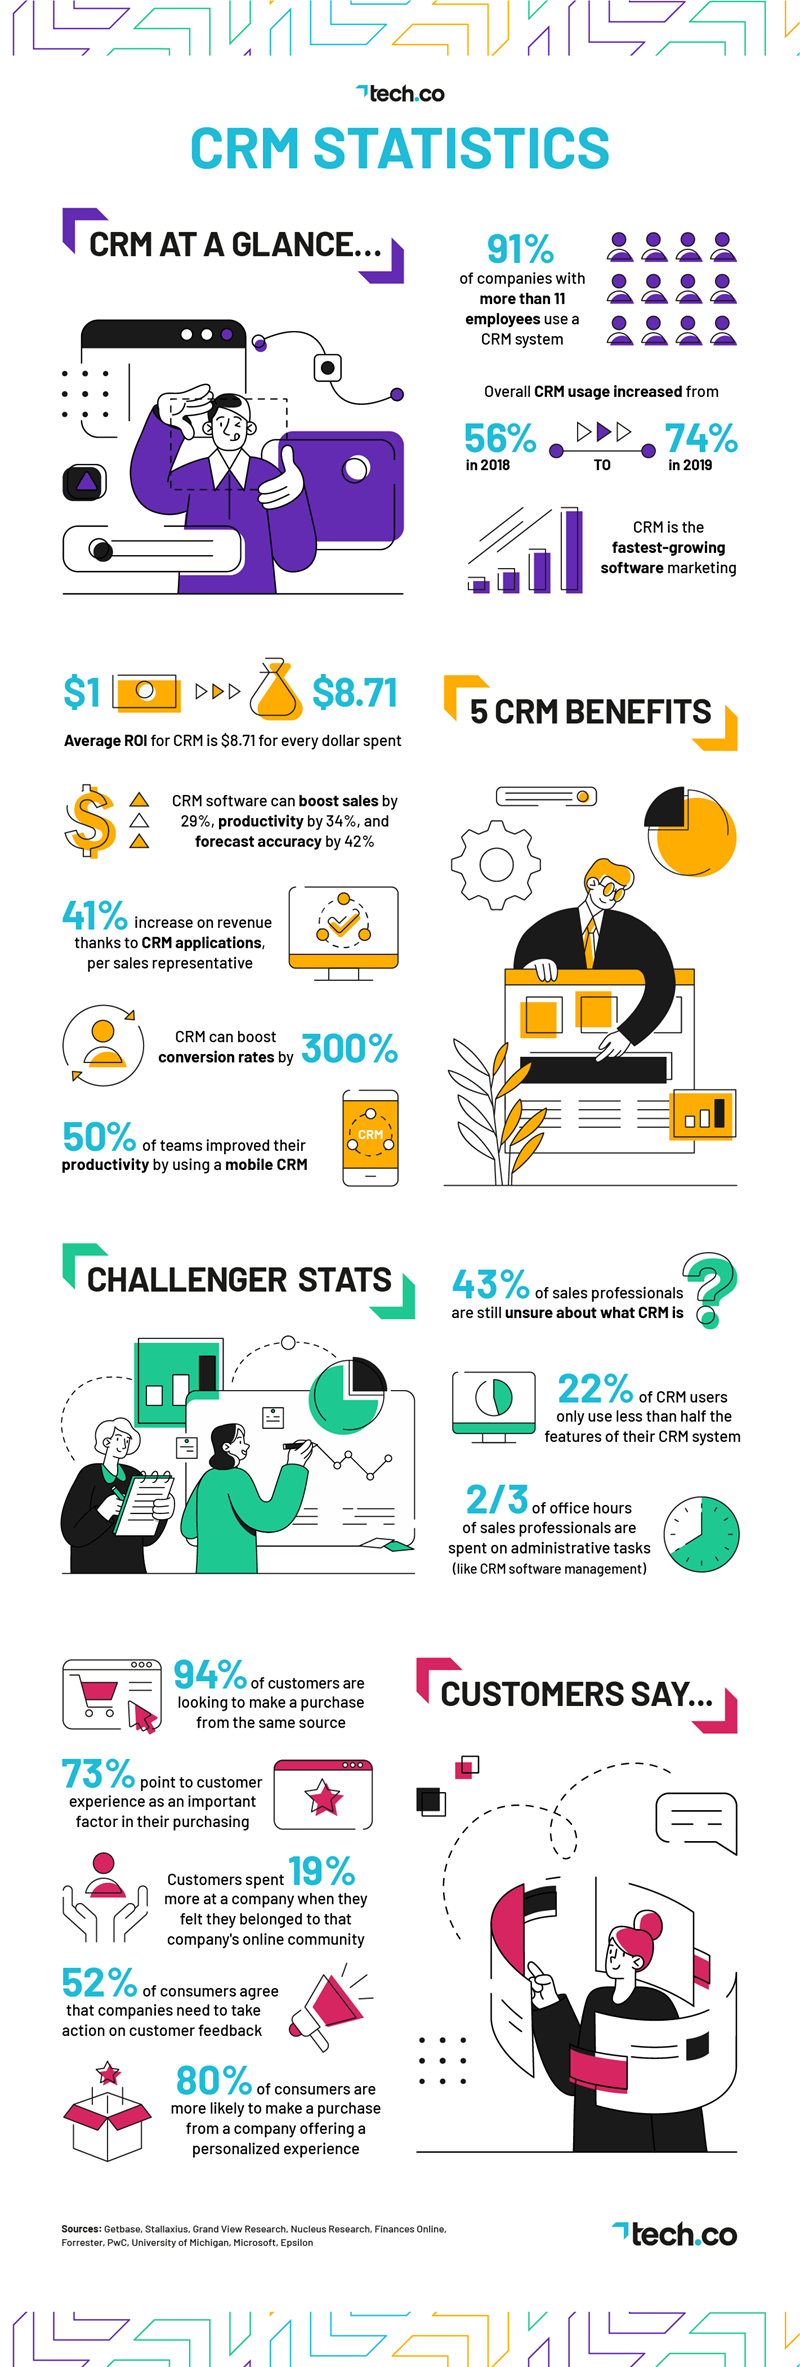 CRM statistics 2020 compiled by tech.co infographic